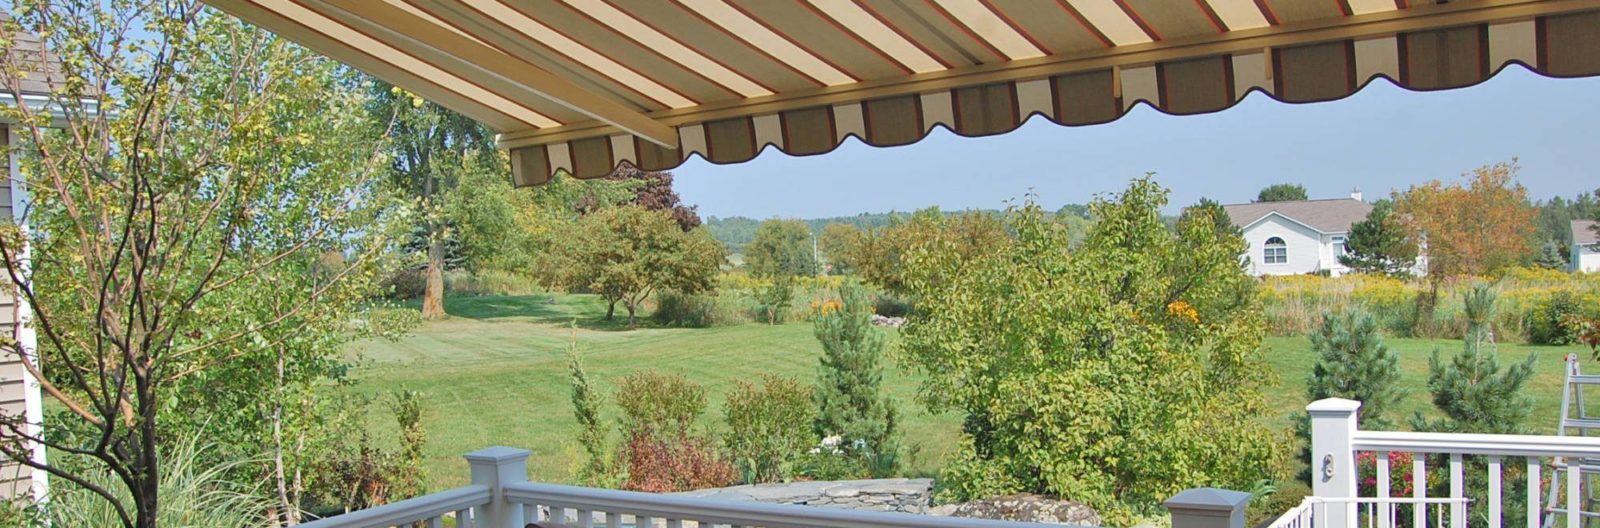 Retractable patio awning view